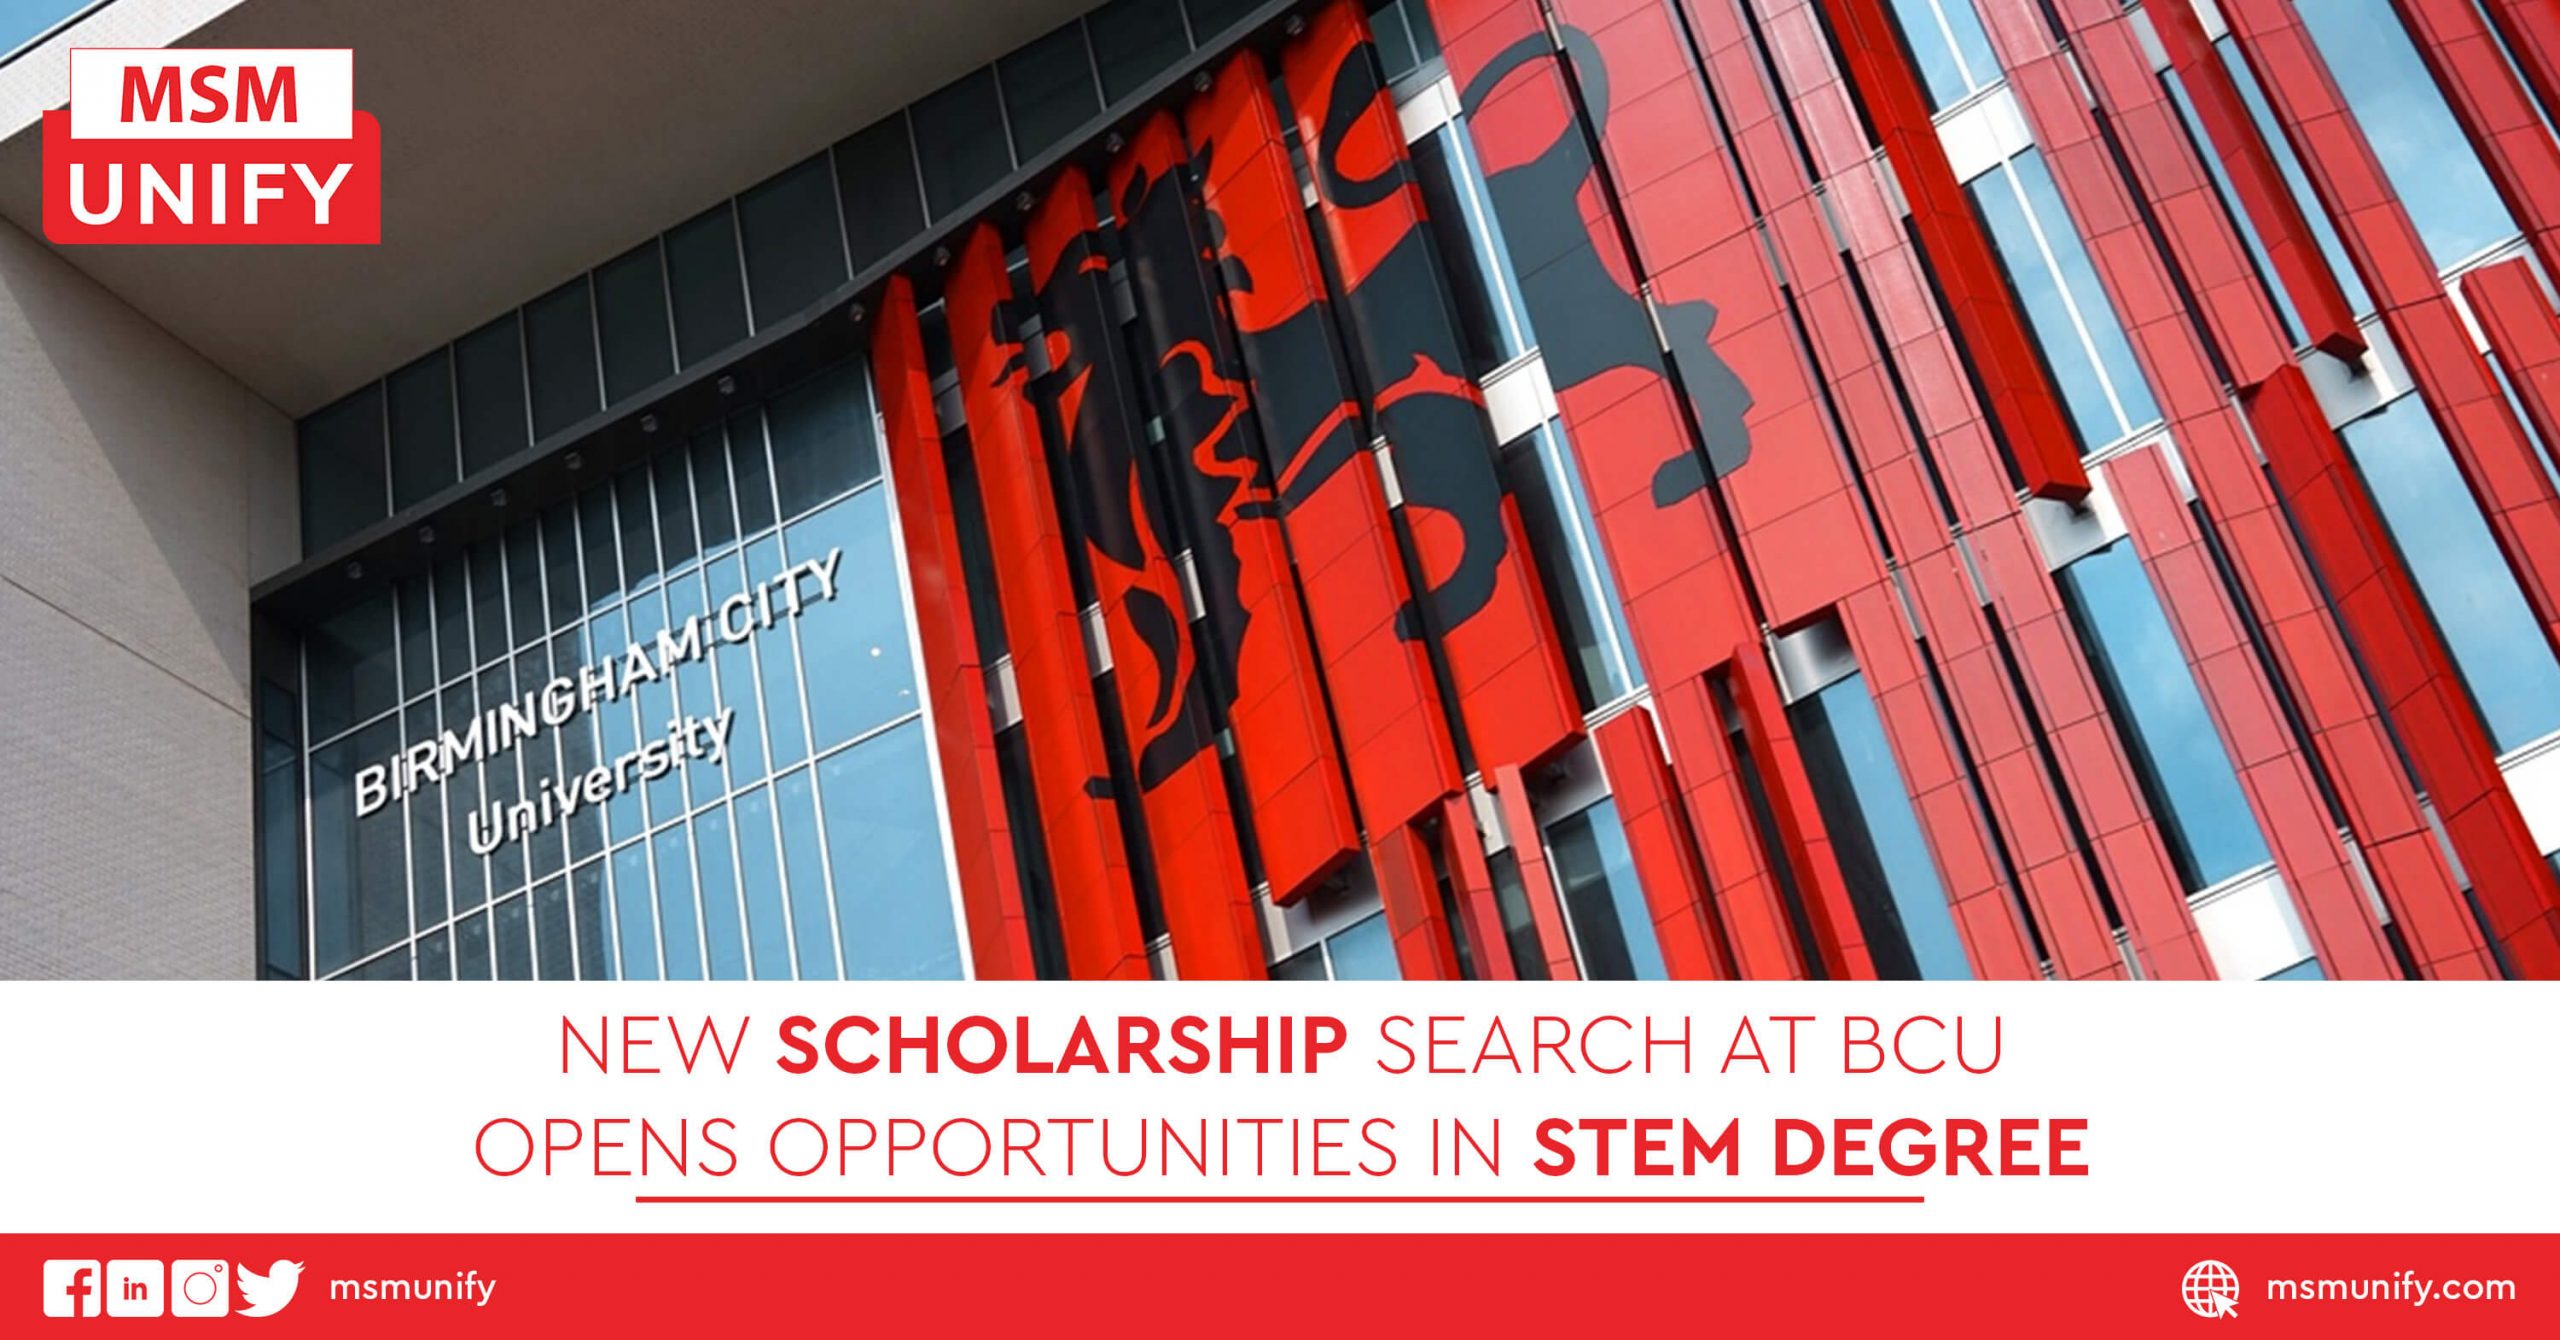 New Scholarship Search at BCU Opens Opportunities in STEM Degree